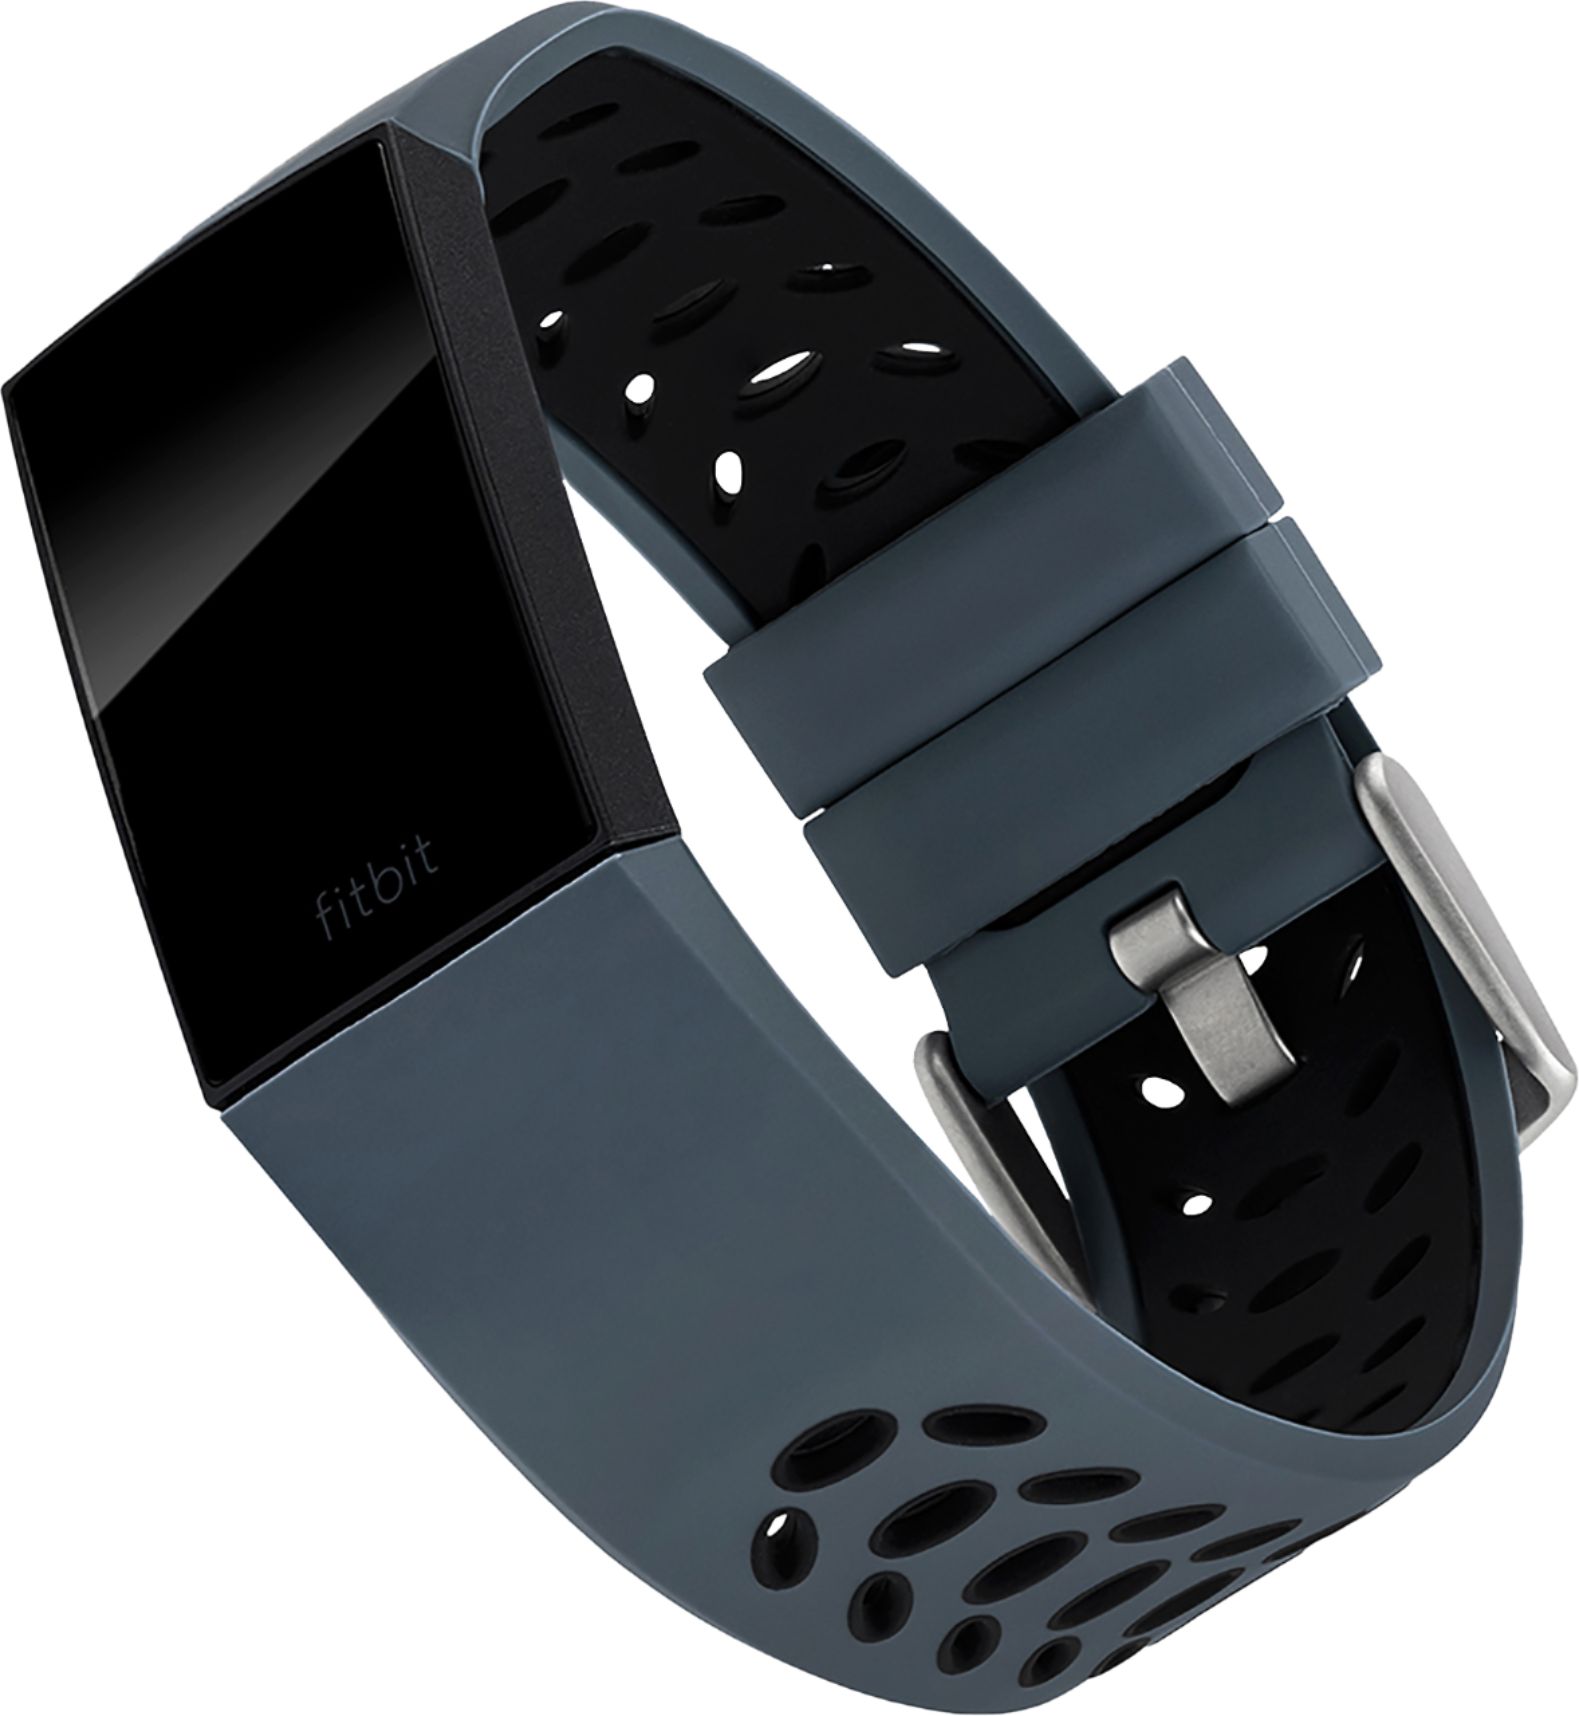 Left View: vivofit Accessory Band Pack, Available in two color packs and sizes